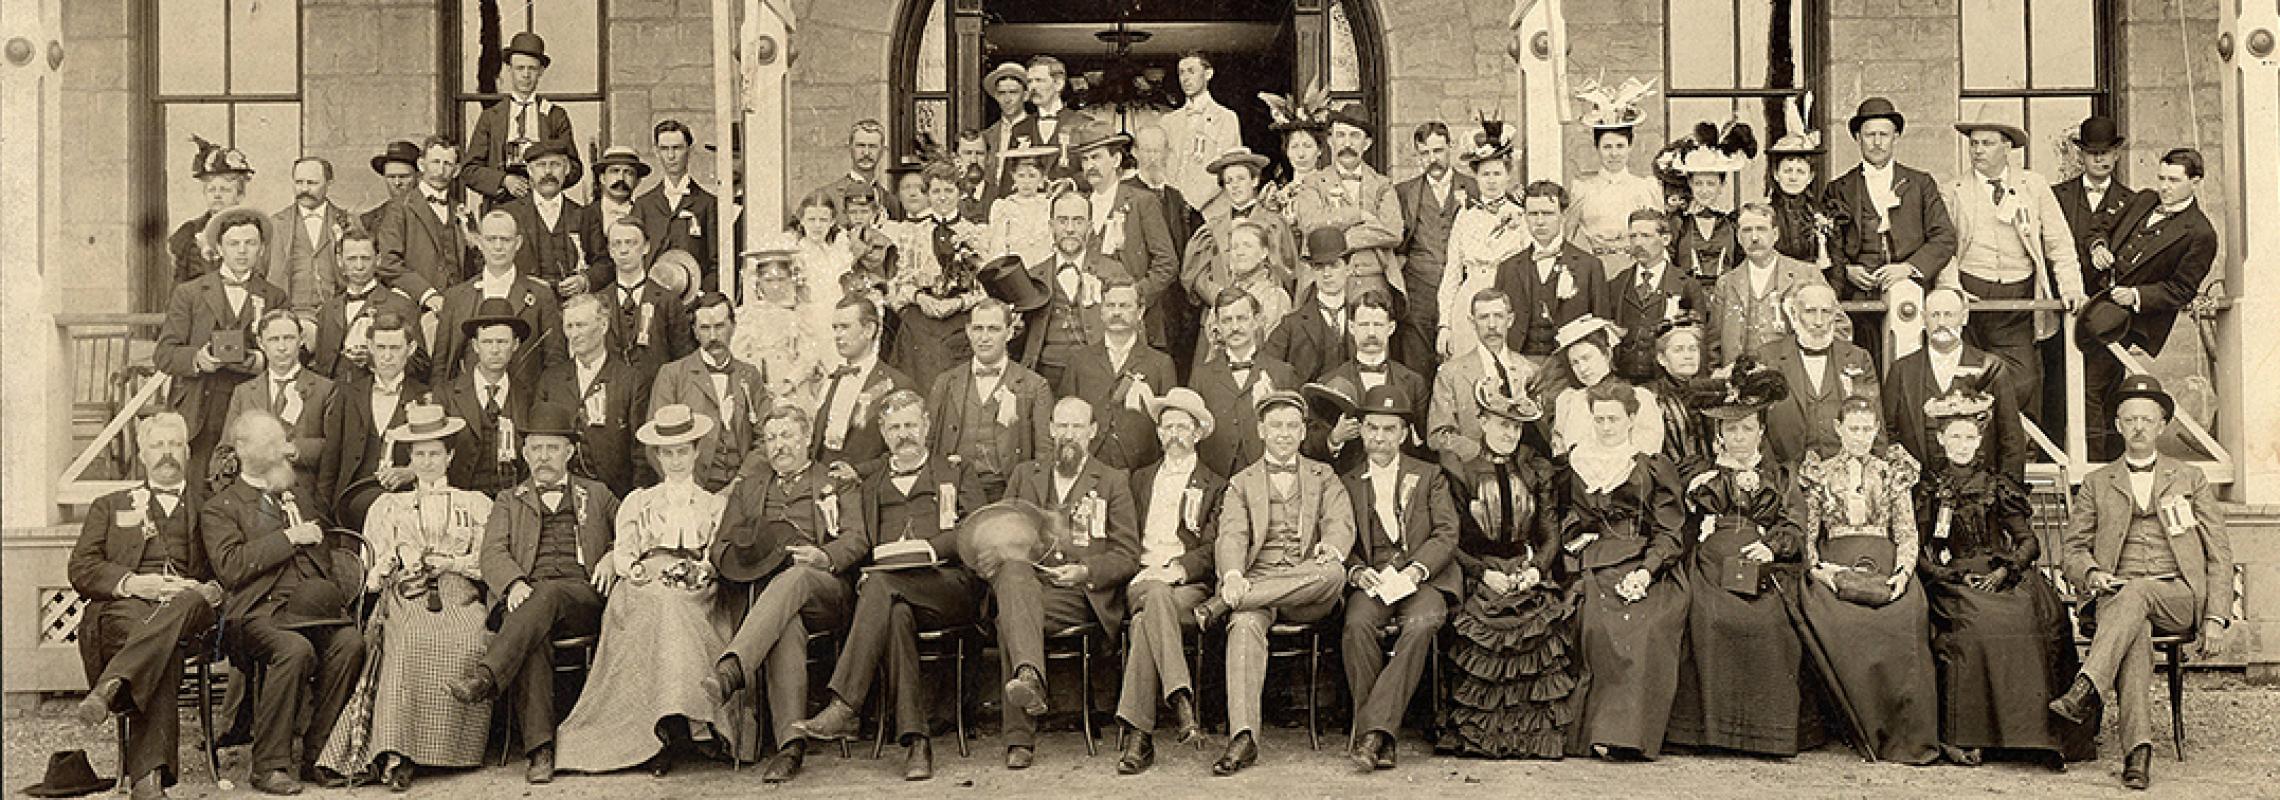 Photo of a group of men and women from 1898 wearing period clothes and arranged in a group outside a building.